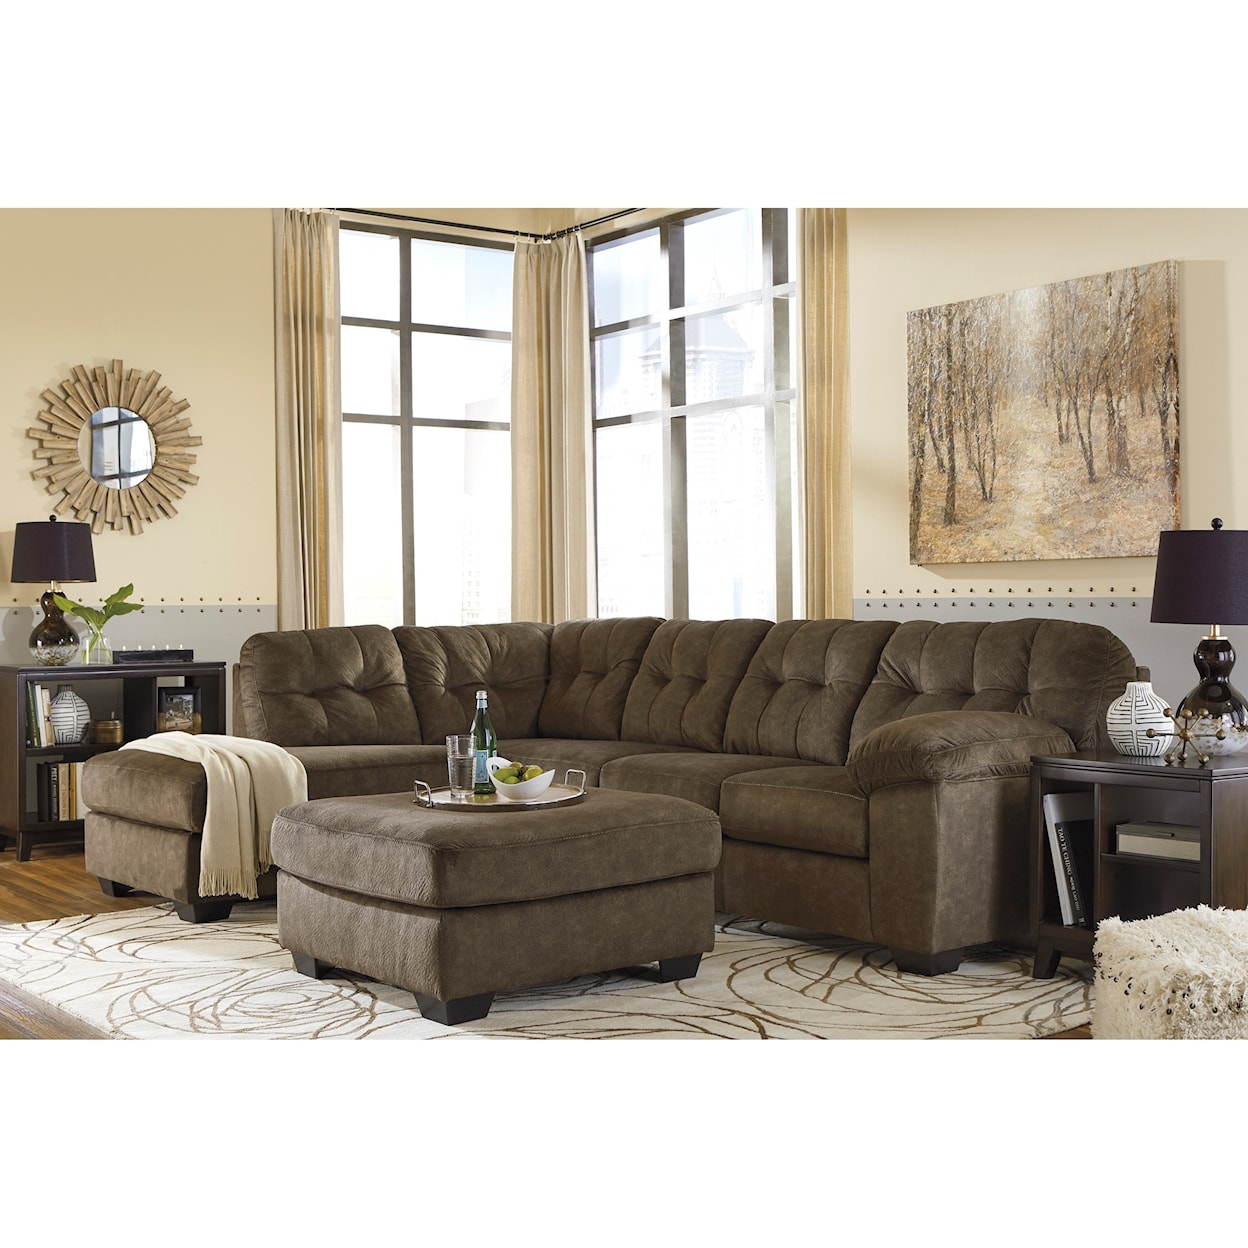 Signature Design by Ashley Accrington Sectional with Left Chaise